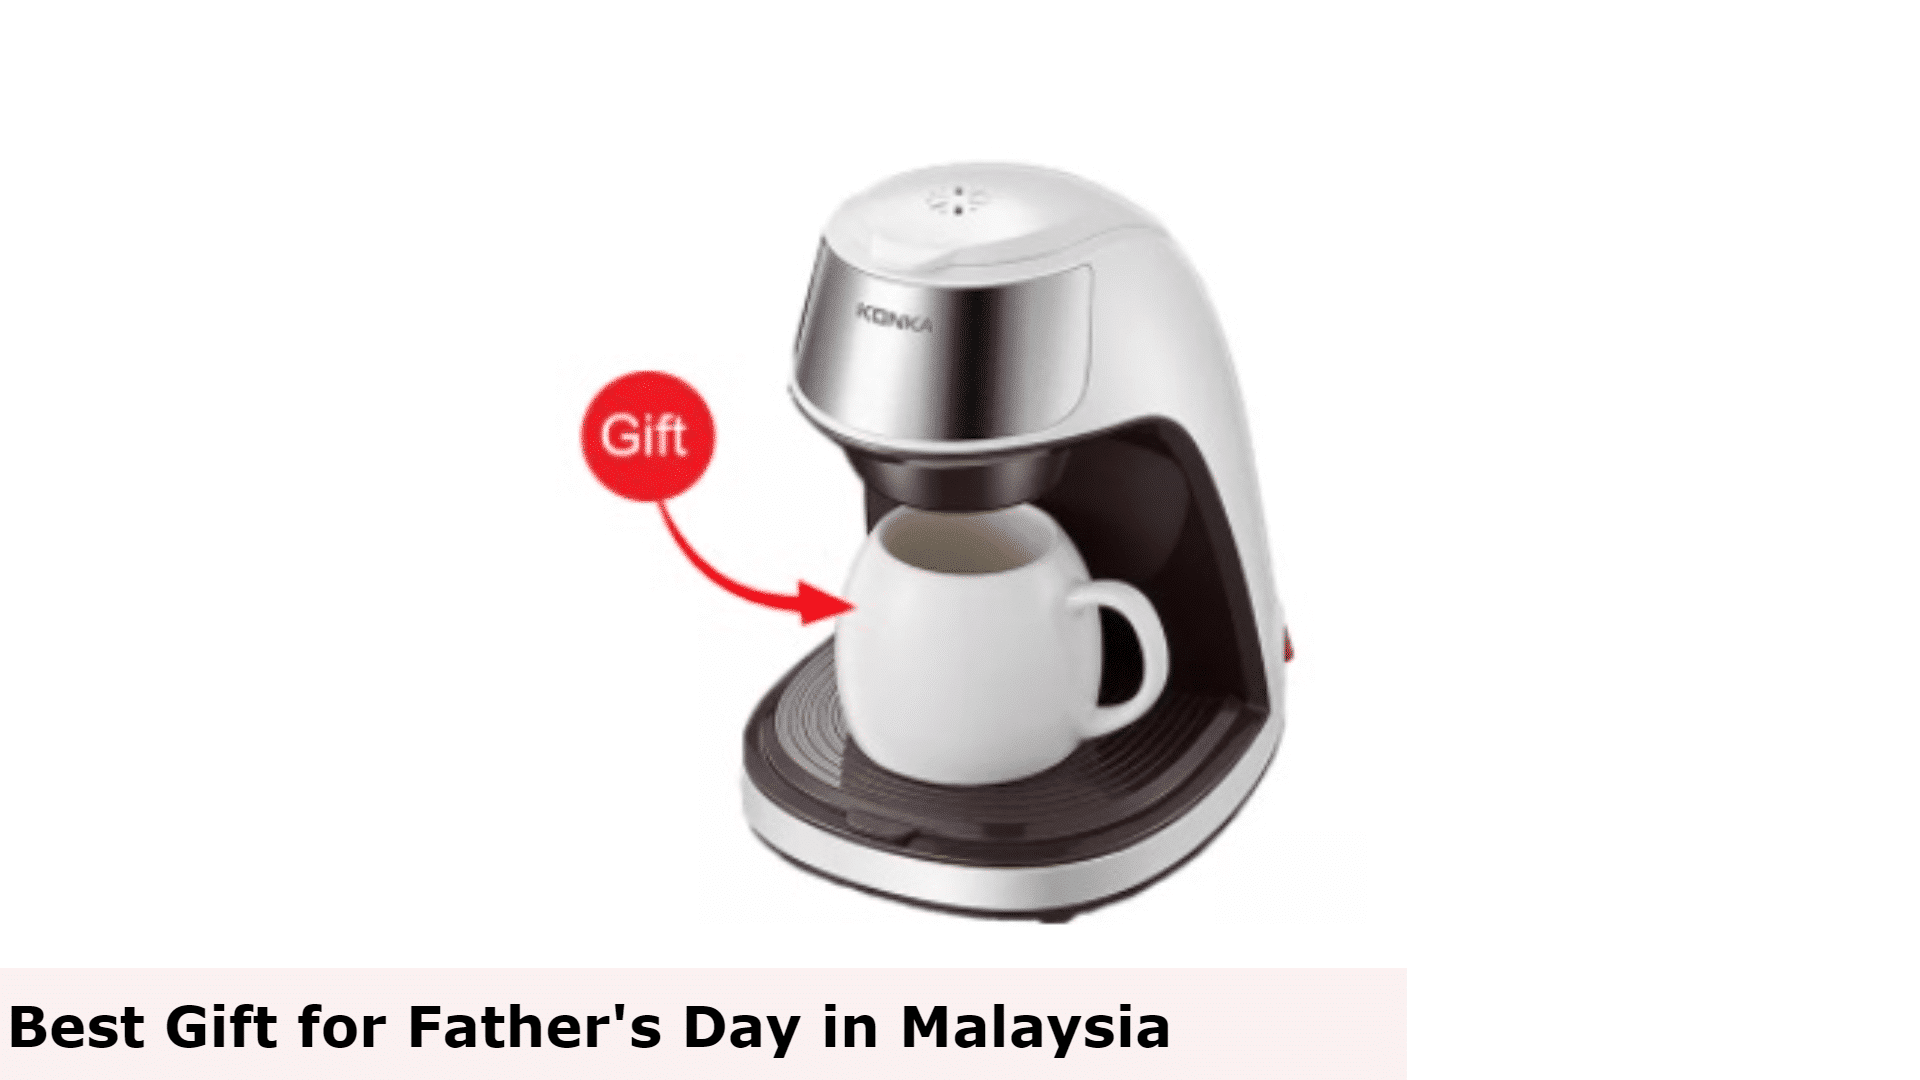 Coffee Machine - Best Gift for Father's Day in Malaysia, Best gift for Father's Day Malaysia, Best Father's Day Gifts for Dad, What do dads want for Father's Day in Malaysia?, What is a good cheap gift for Father's Day in Malaysia?, Do you give gifts on Father's Day in Malaysia?, gifts for dad who wants nothing, simple father's day gift ideas, father's day gift ideas 2022, father's day gift ideas during covid, father's day gift ideas from daughter, unique gifts for dad, father's day gift ideas from wife, fathers day gifts from son, What buy for a dad that doesn't want anything?, What to get a dad that is hard to buy for?, What should I get my boring dad for Christmas?, What gifts do dads like?,